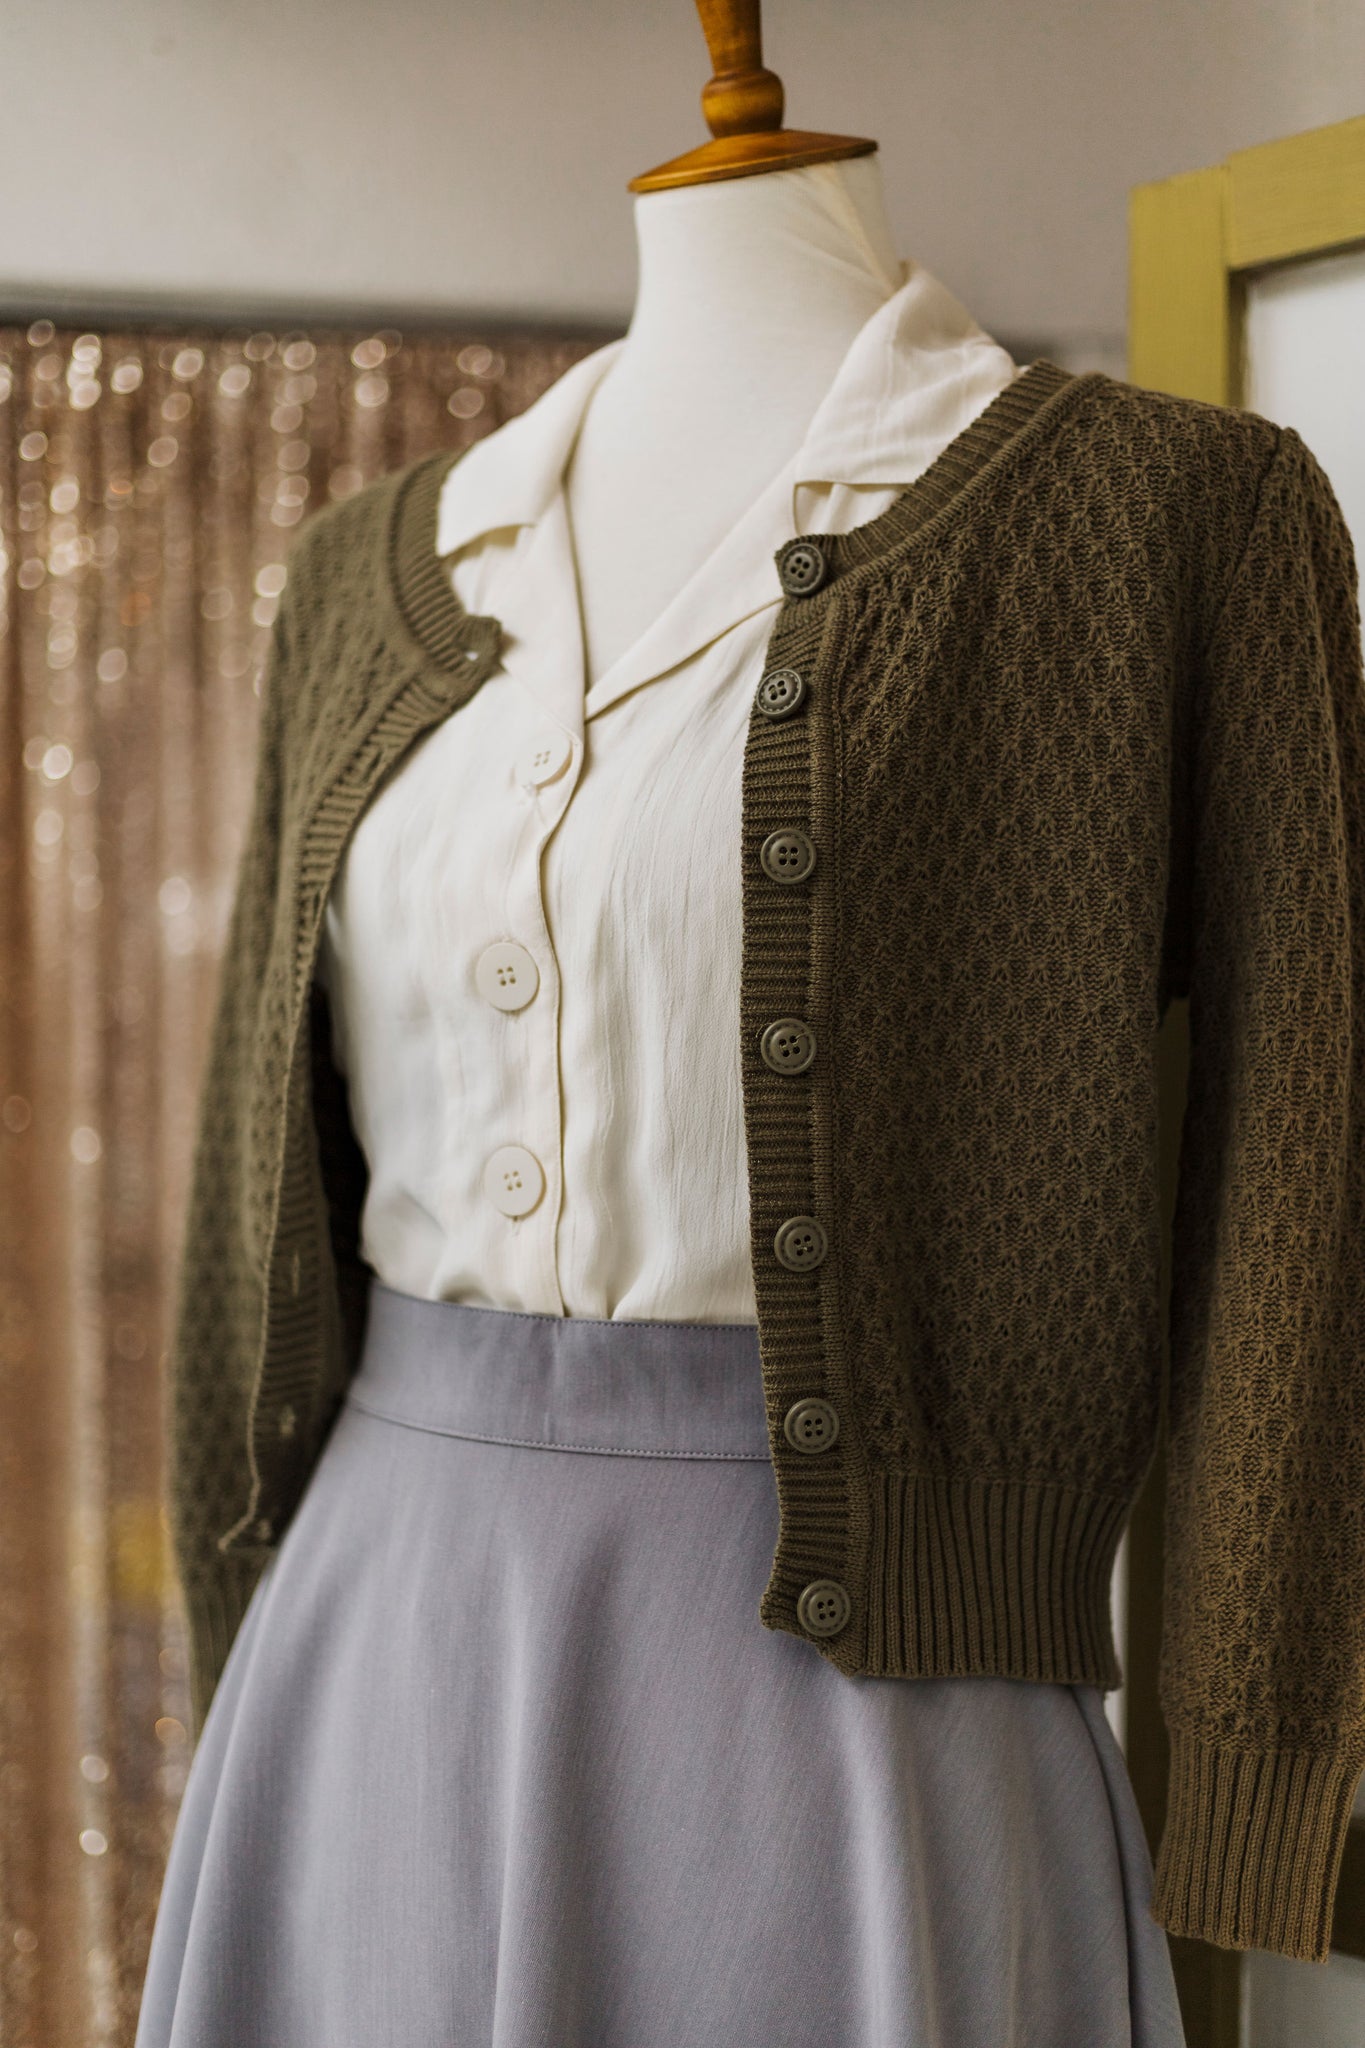 Daily Cardigan Sweater- Olive